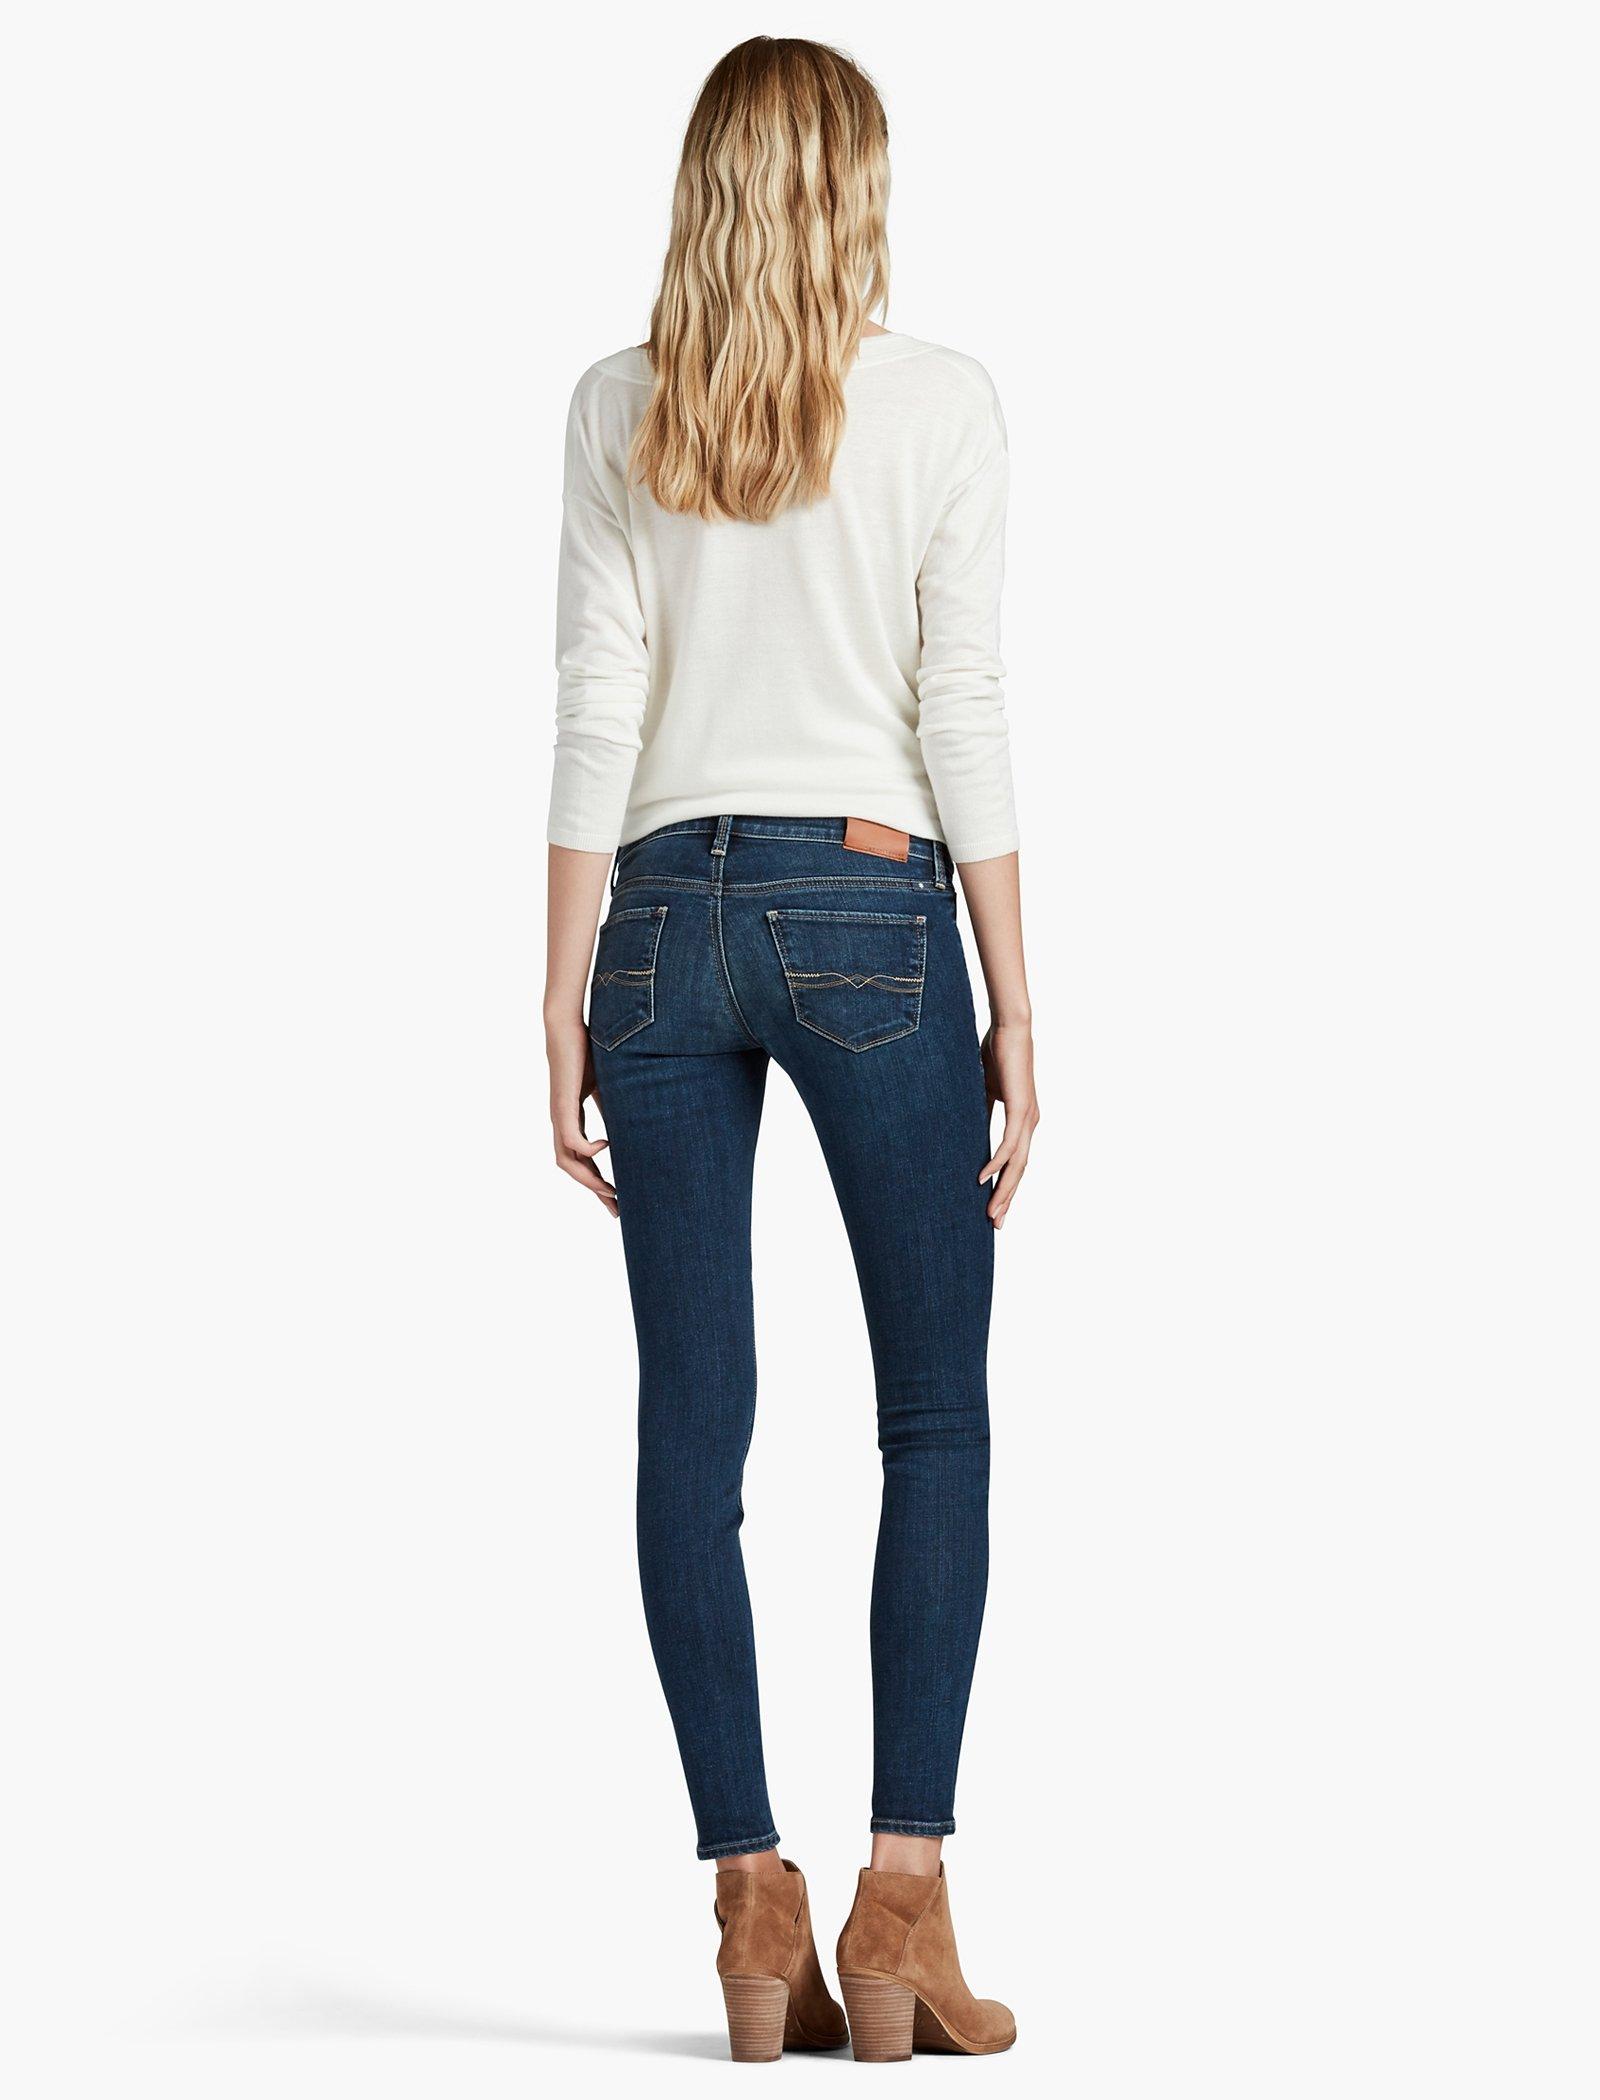 Lucky Brand Charlie Skinny Jeans Women's Size 2/26 - beyond exchange